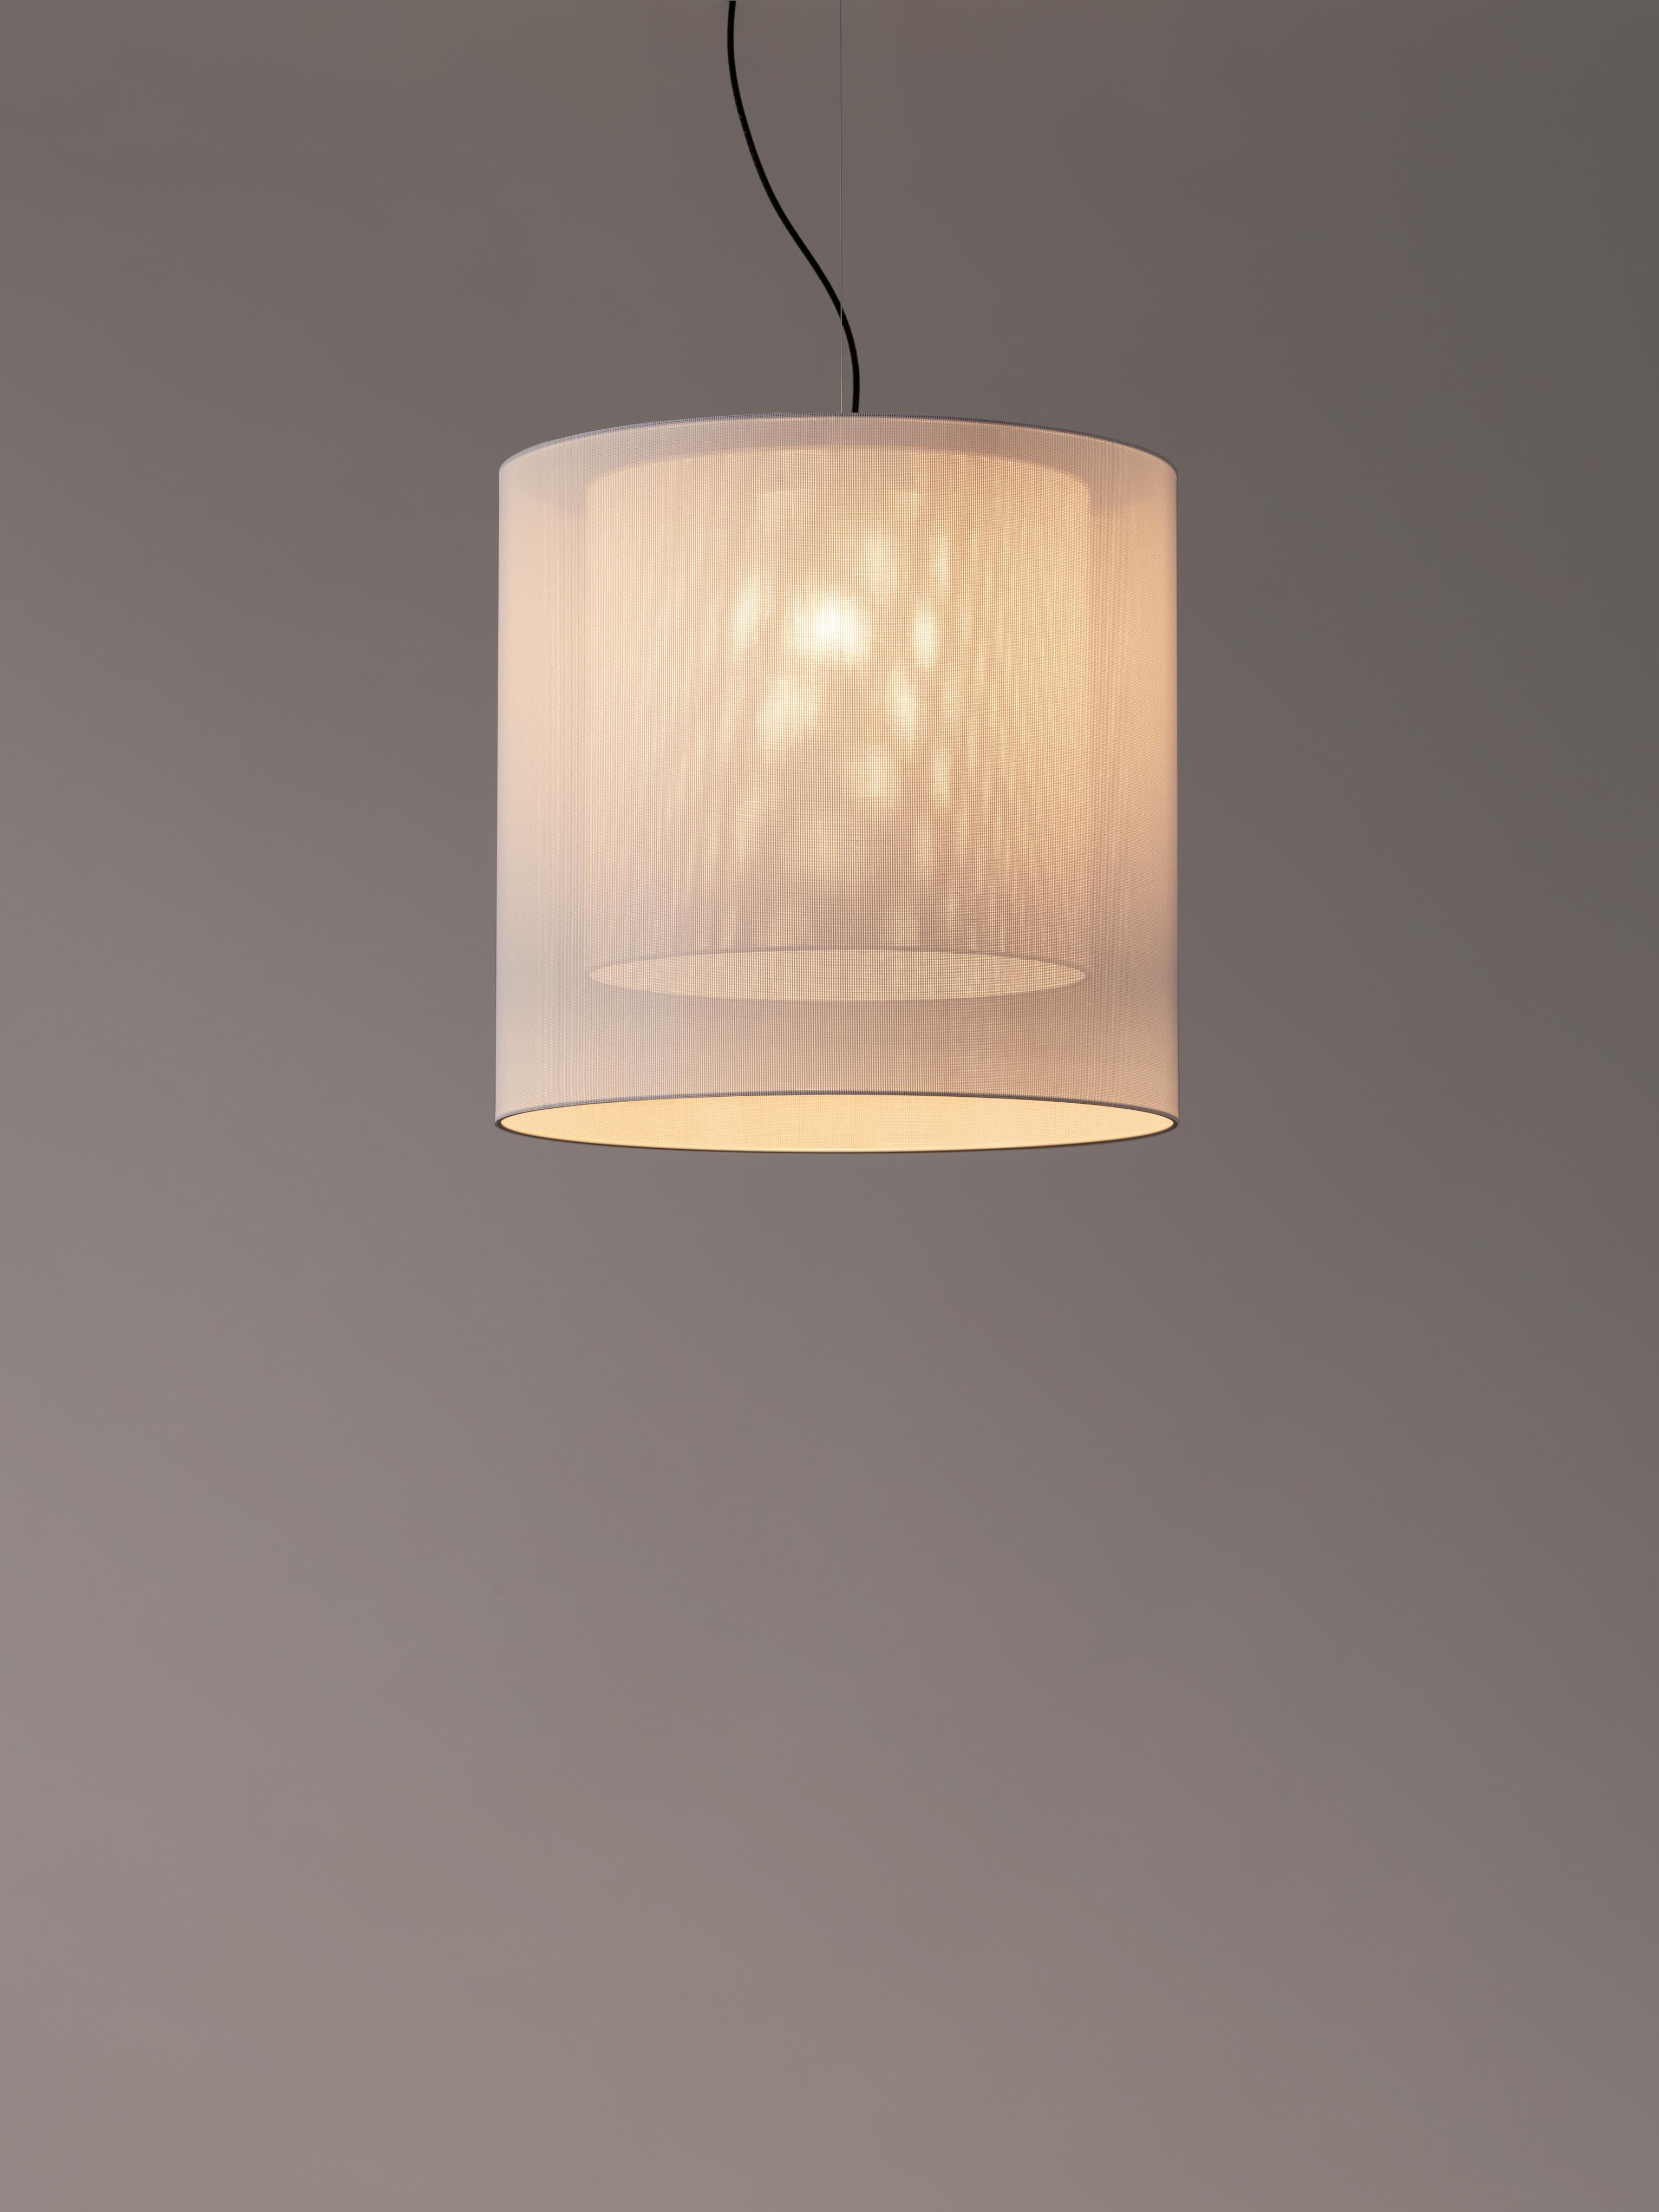 White moaré LM pendant lamp by Antoni Arola
Dimensions: D 62 x H 60 cm
Materials: Metal, polyester.
Available in other colors and sizes.

Moaré’s multiple combinations of formats and colours make it highly versatile. The series takes its name